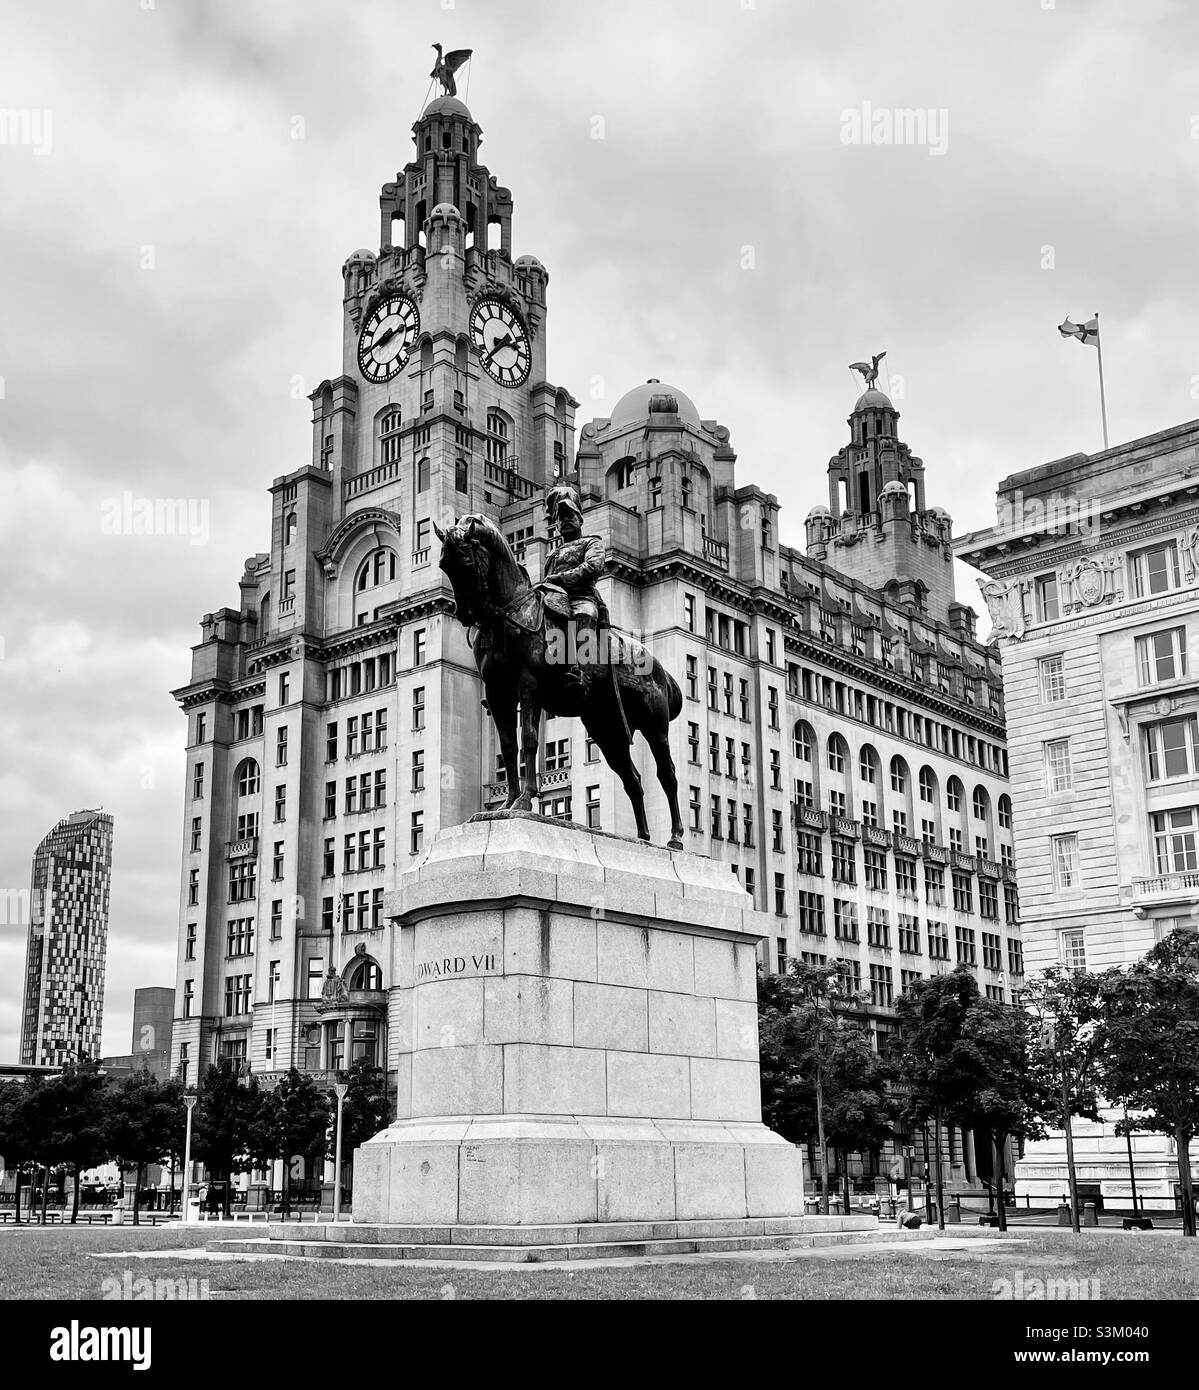 ‘This fine City’ The Edward VII statue stands proudly in front of The Royal Liver Building in Liverpool Stock Photo